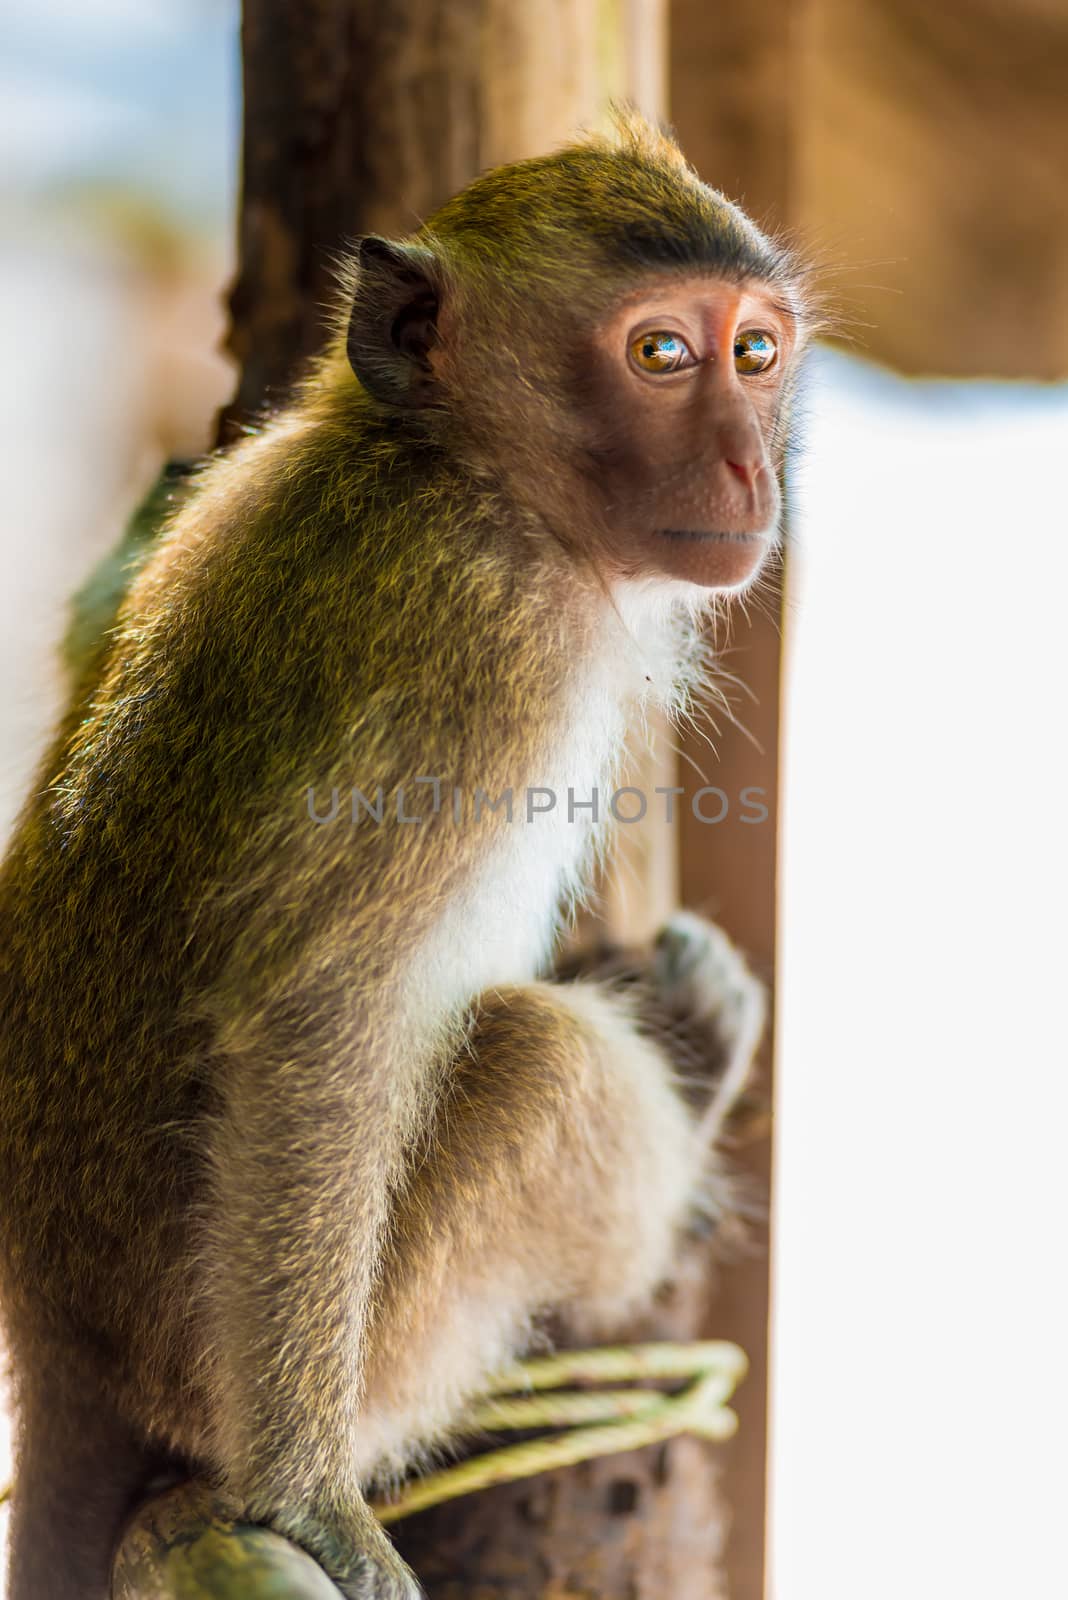 vertical portrait of a monkey in a natural habitat by kosmsos111